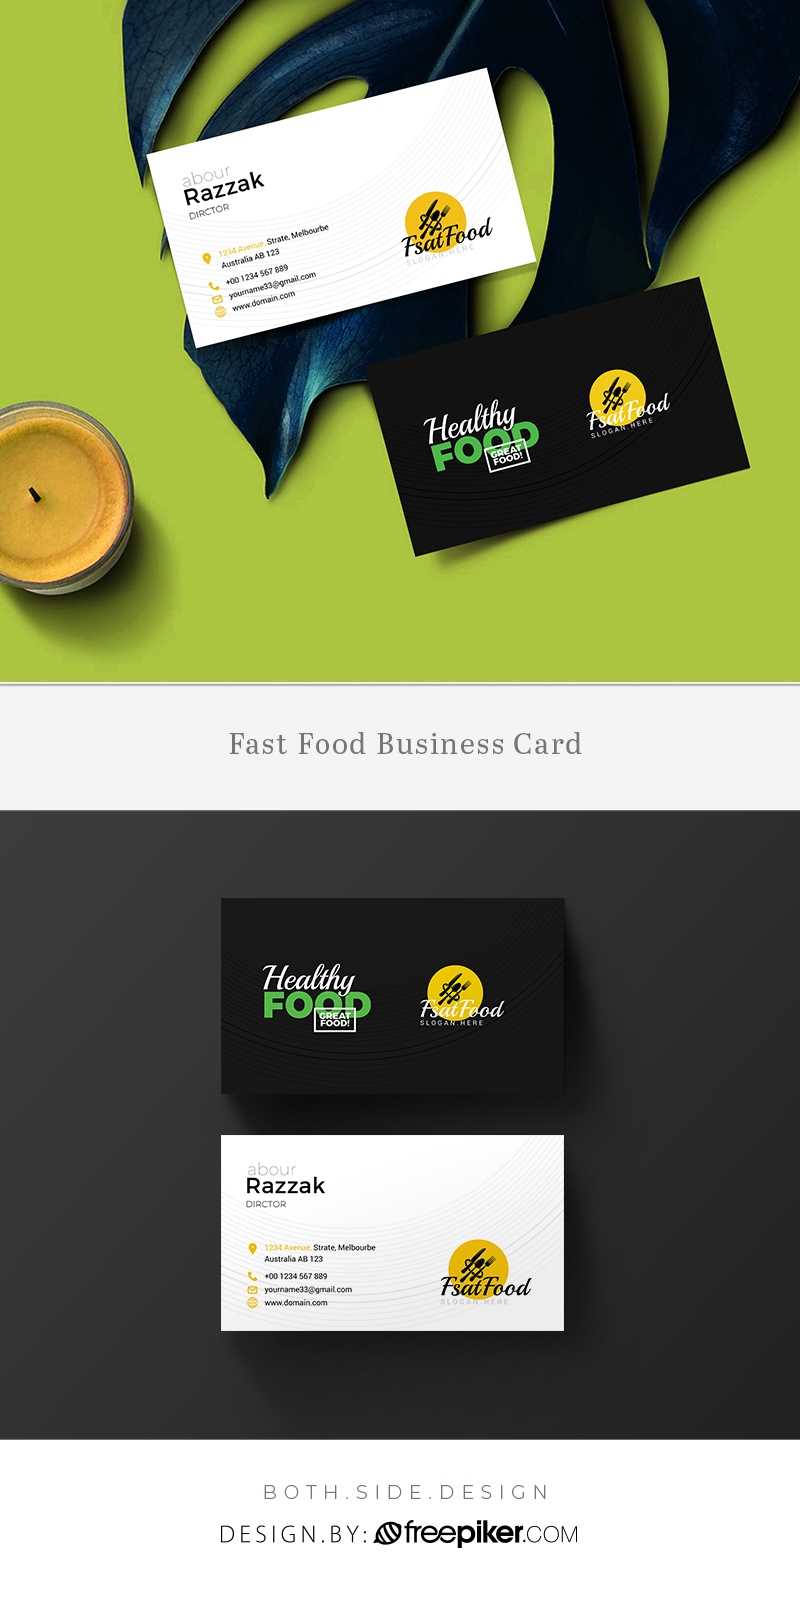 Freepiker | Food And Restaurant Business Card Template With Regard To Restaurant Business Cards Templates Free